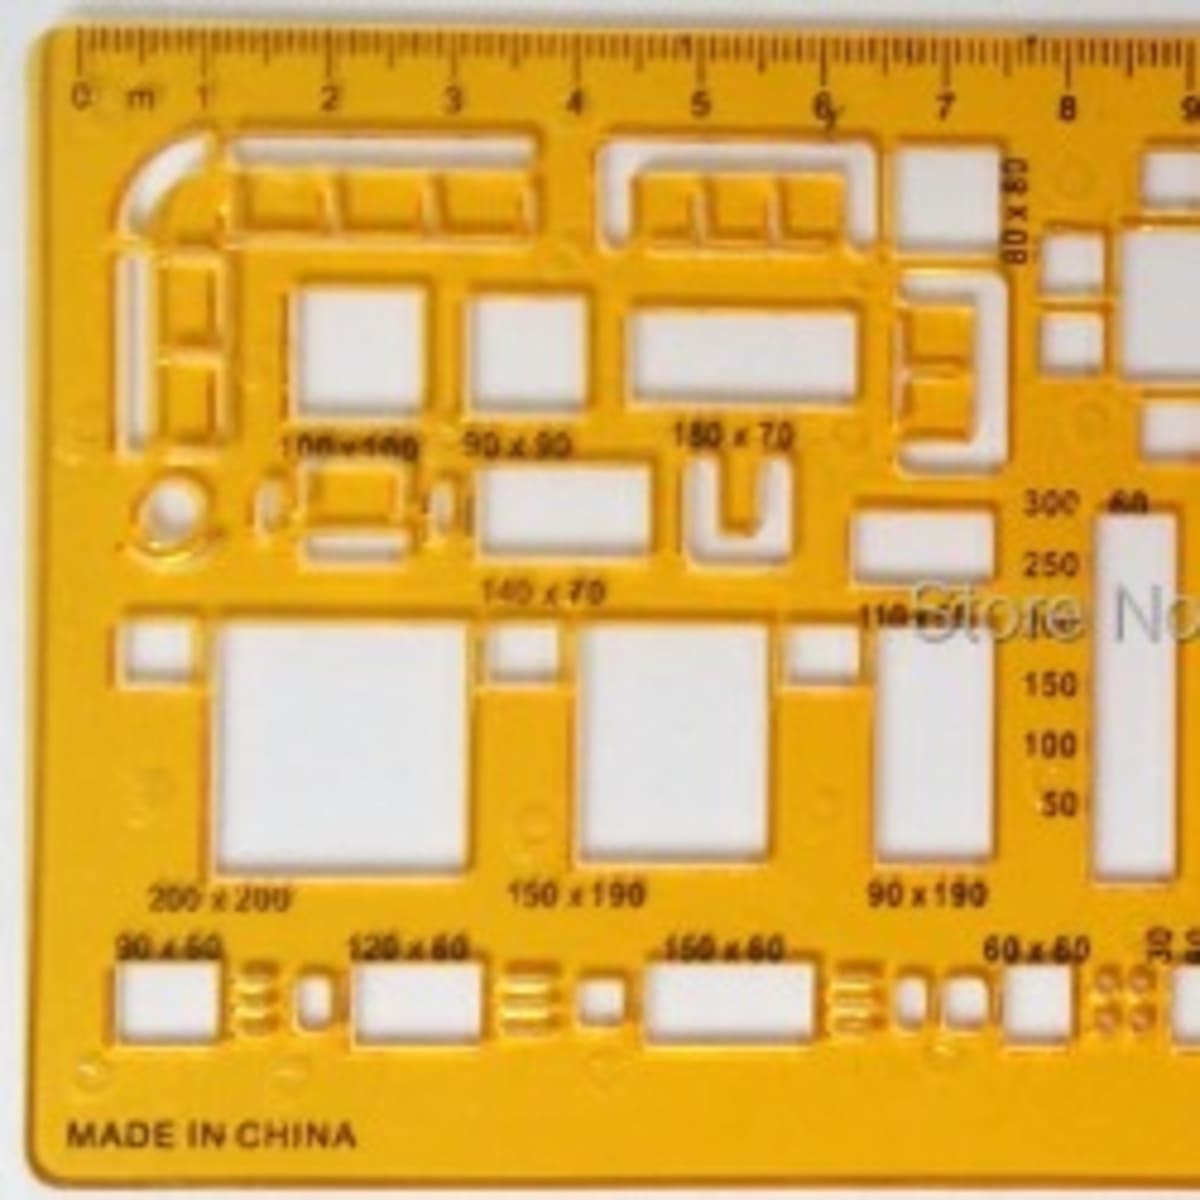 Buy 1:50 Scale Architectural Drawing Template Stencil - Architect Technical Drafting  Supplies - Plastic Map Marking Stencil from Shanghai Cya Aviation Tech  Ltd., China